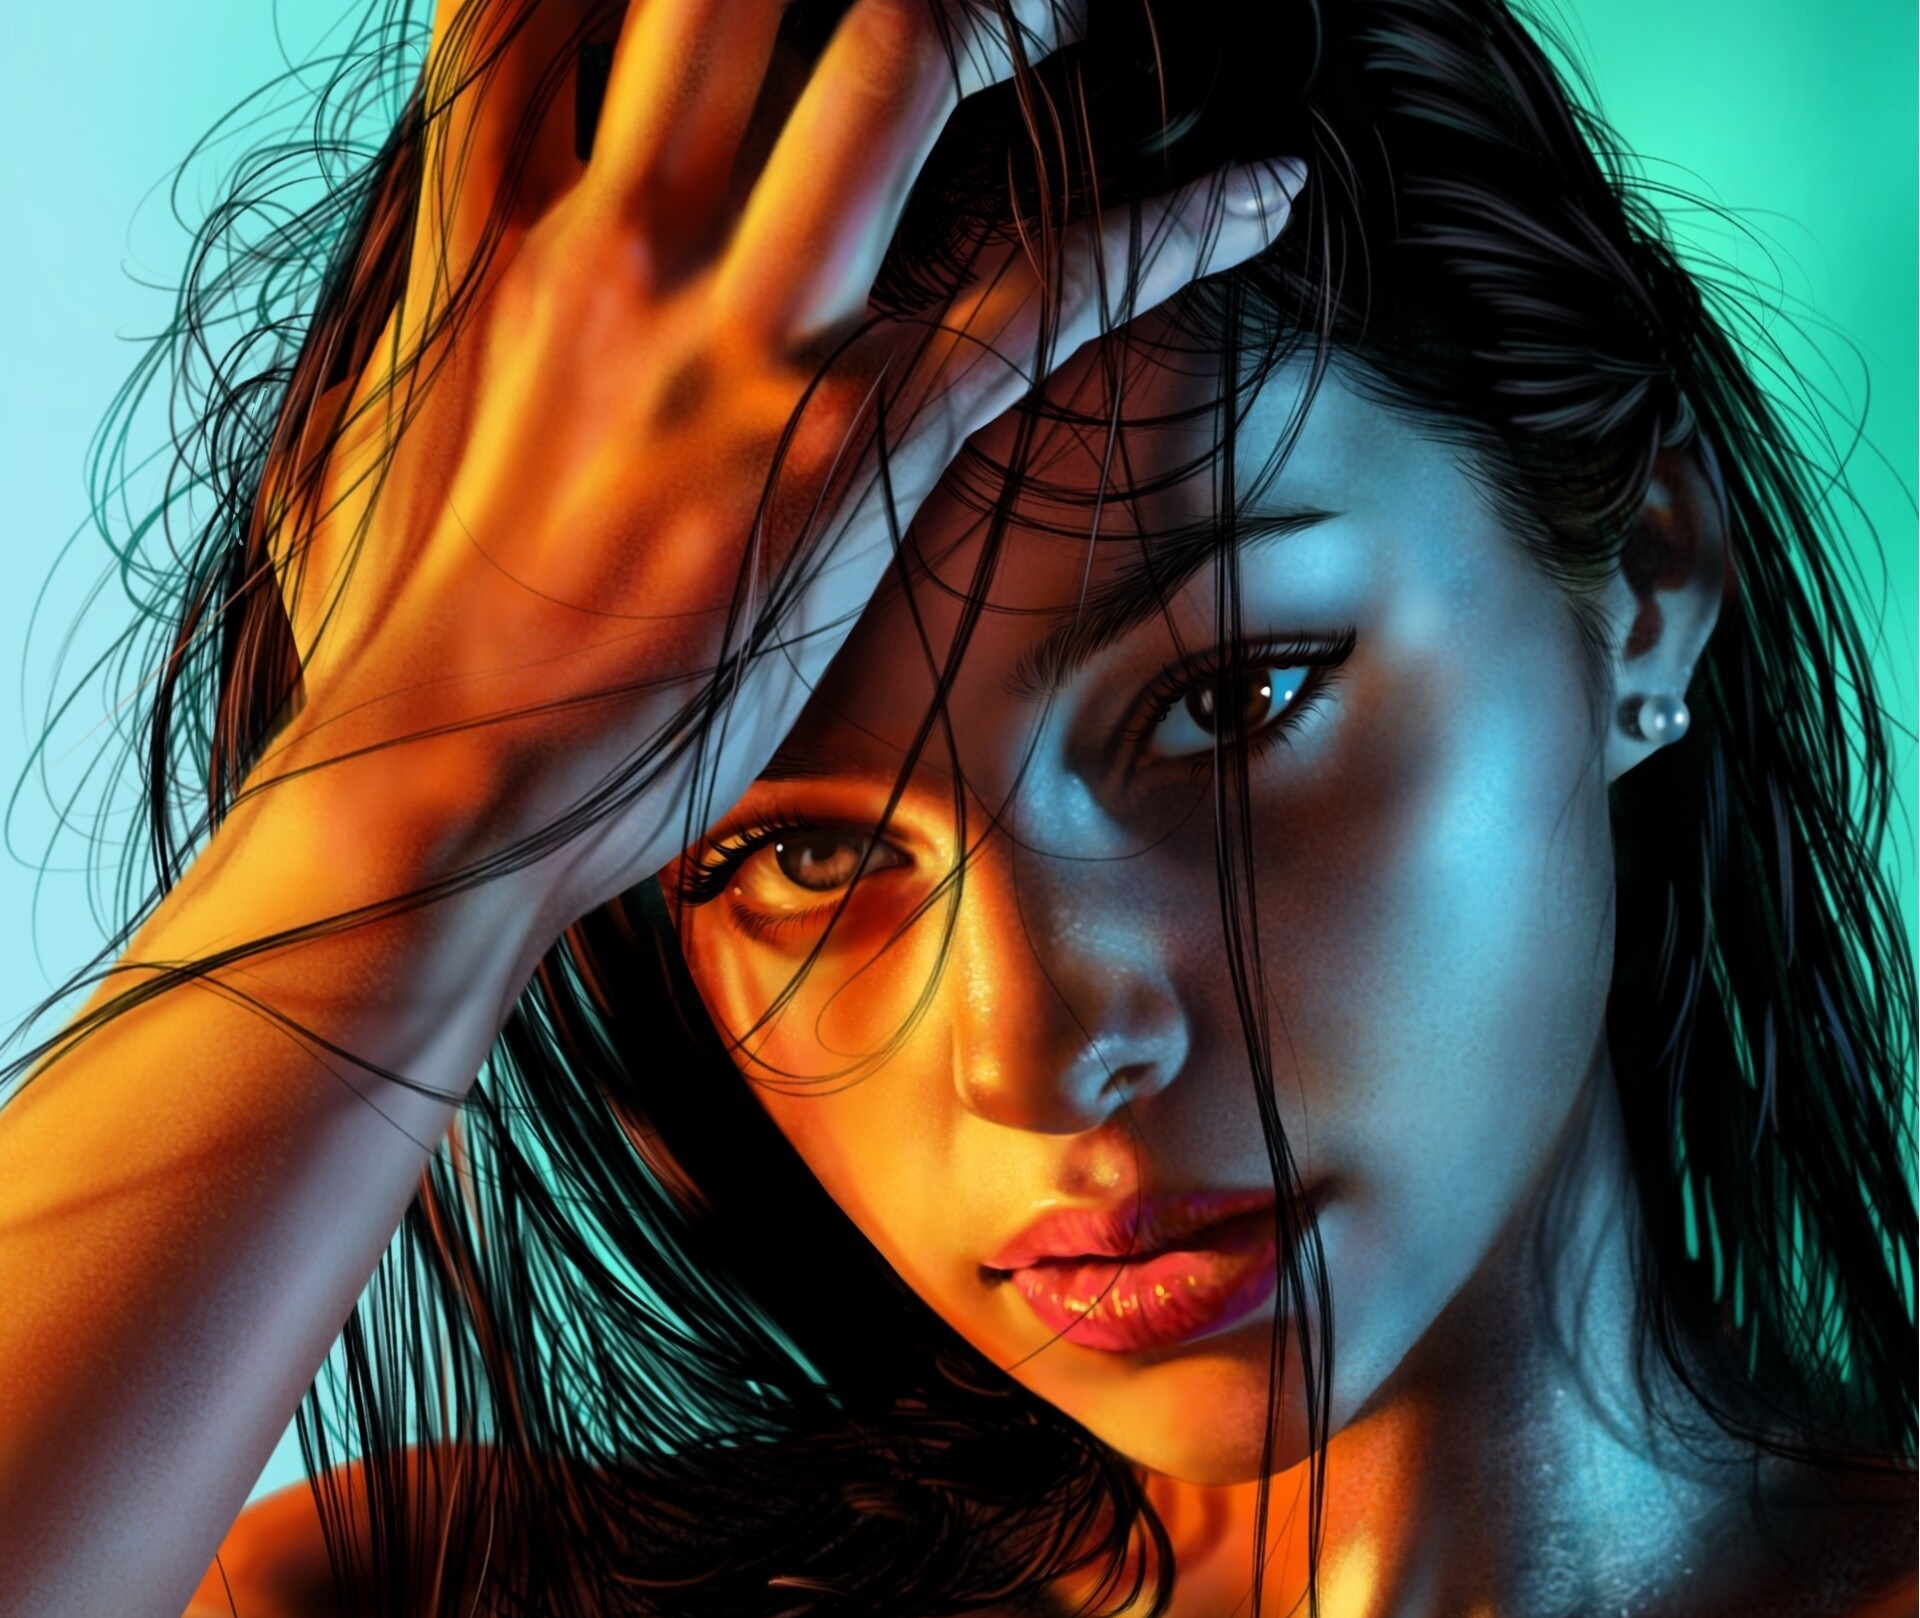 Rendering of a girl with messy black hair